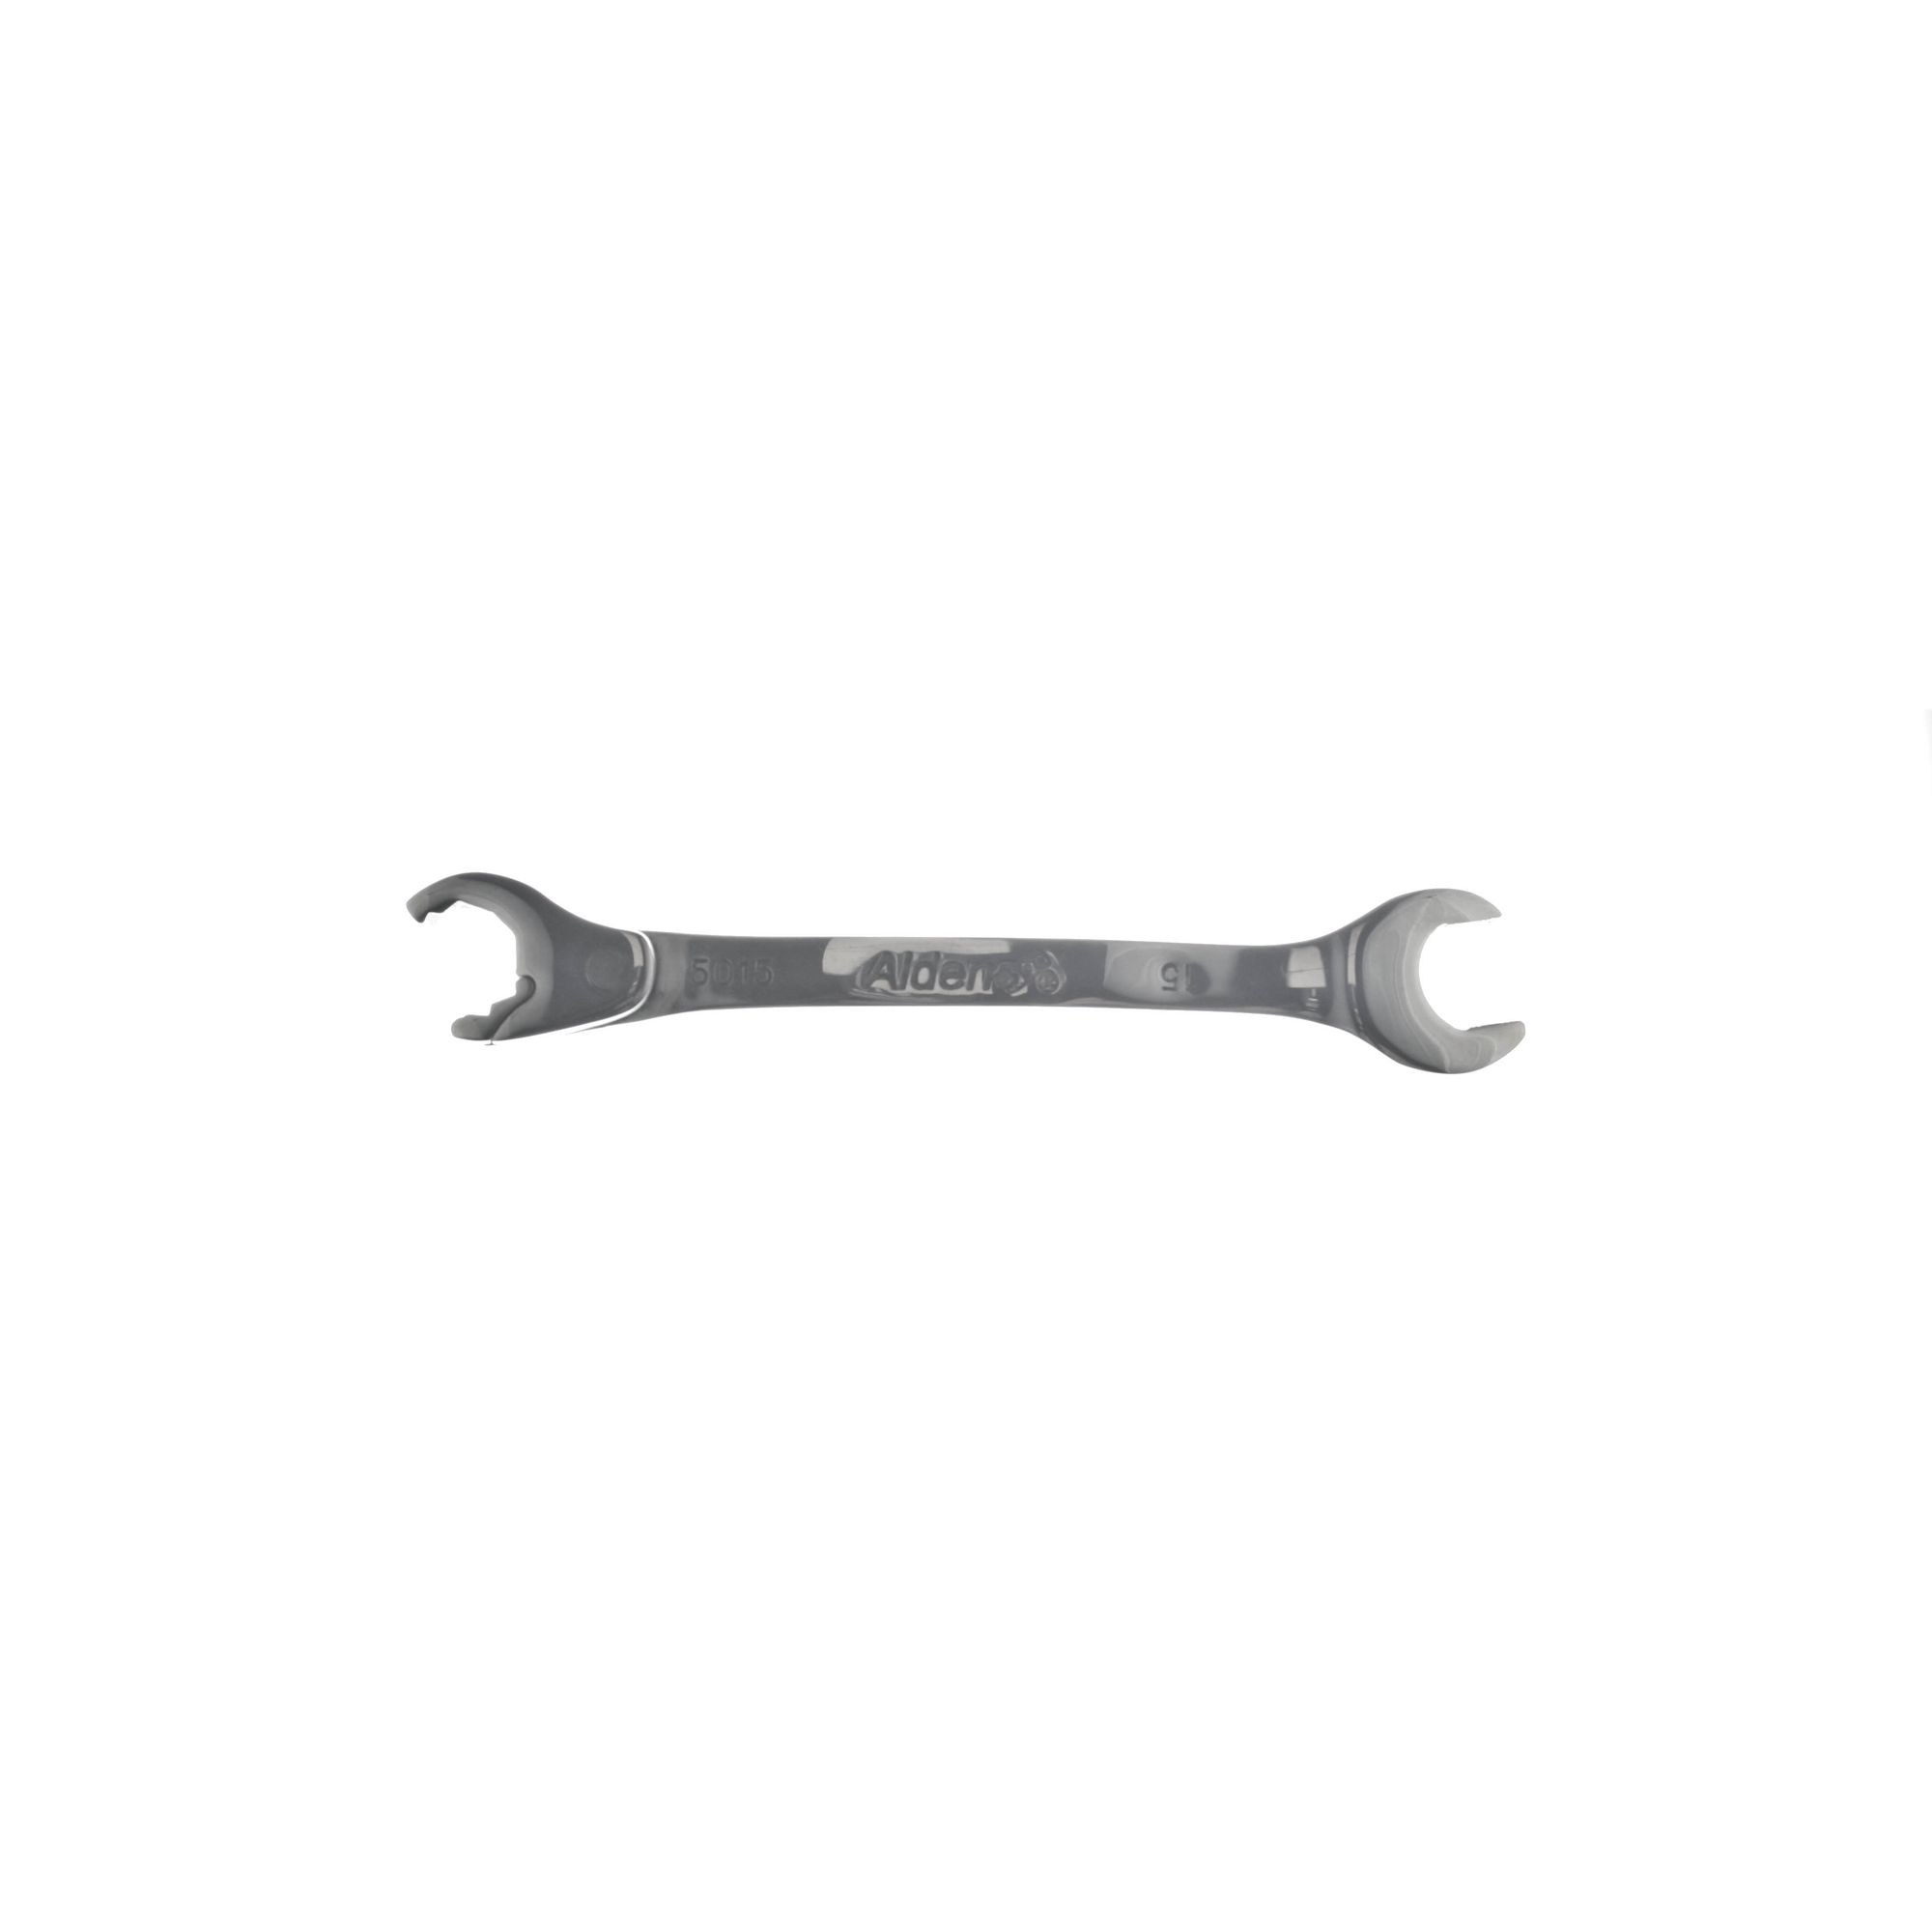 Chicago Brand 15mm Open-End Ratchet Wrench